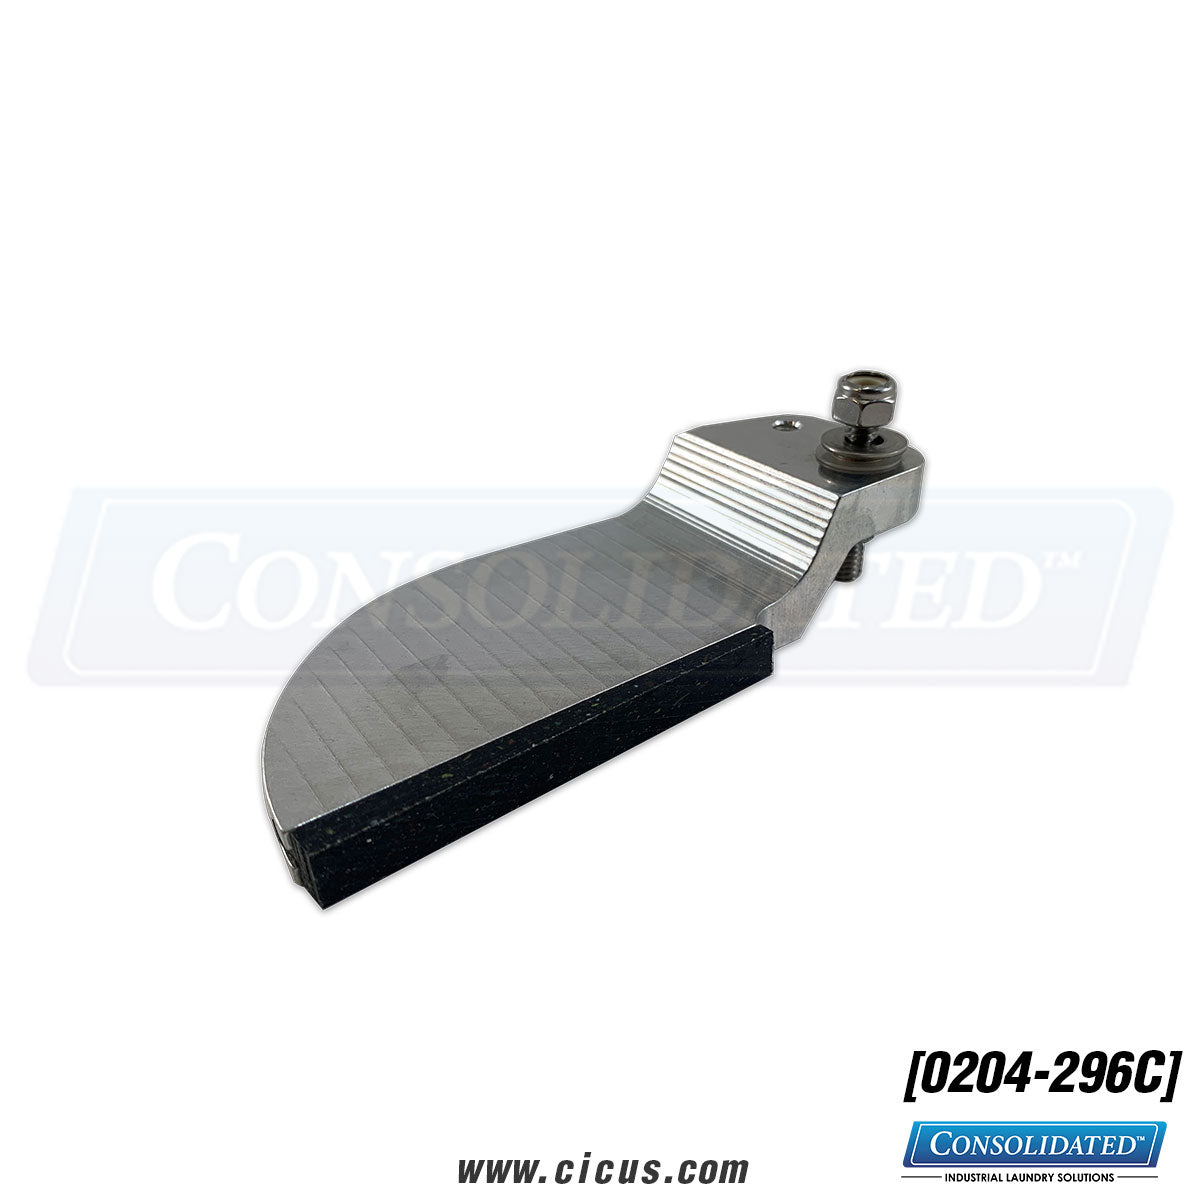 CICUS Left Jaw Transfer Clamp For Chicago Dryer King Edge [0204-296C]